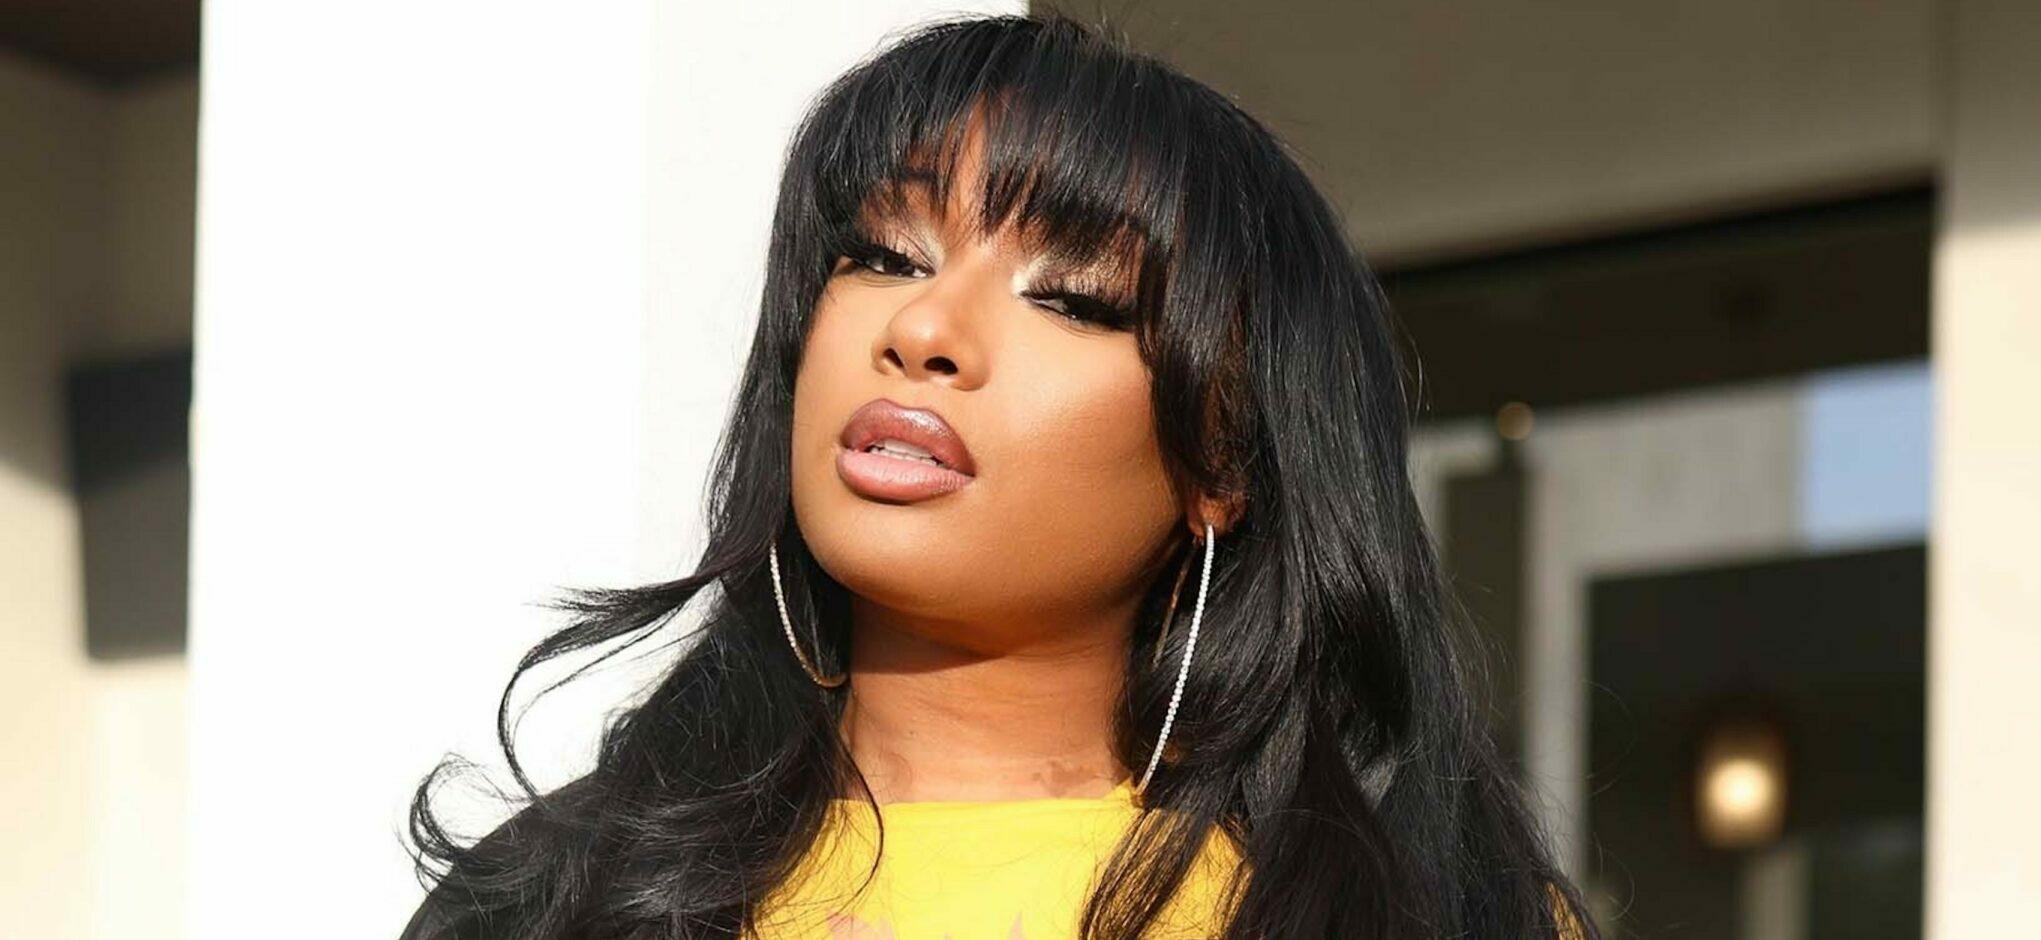 Megan Thee Stallion shows she apos s a apos Hot Girl apos - as she launches new clothing line